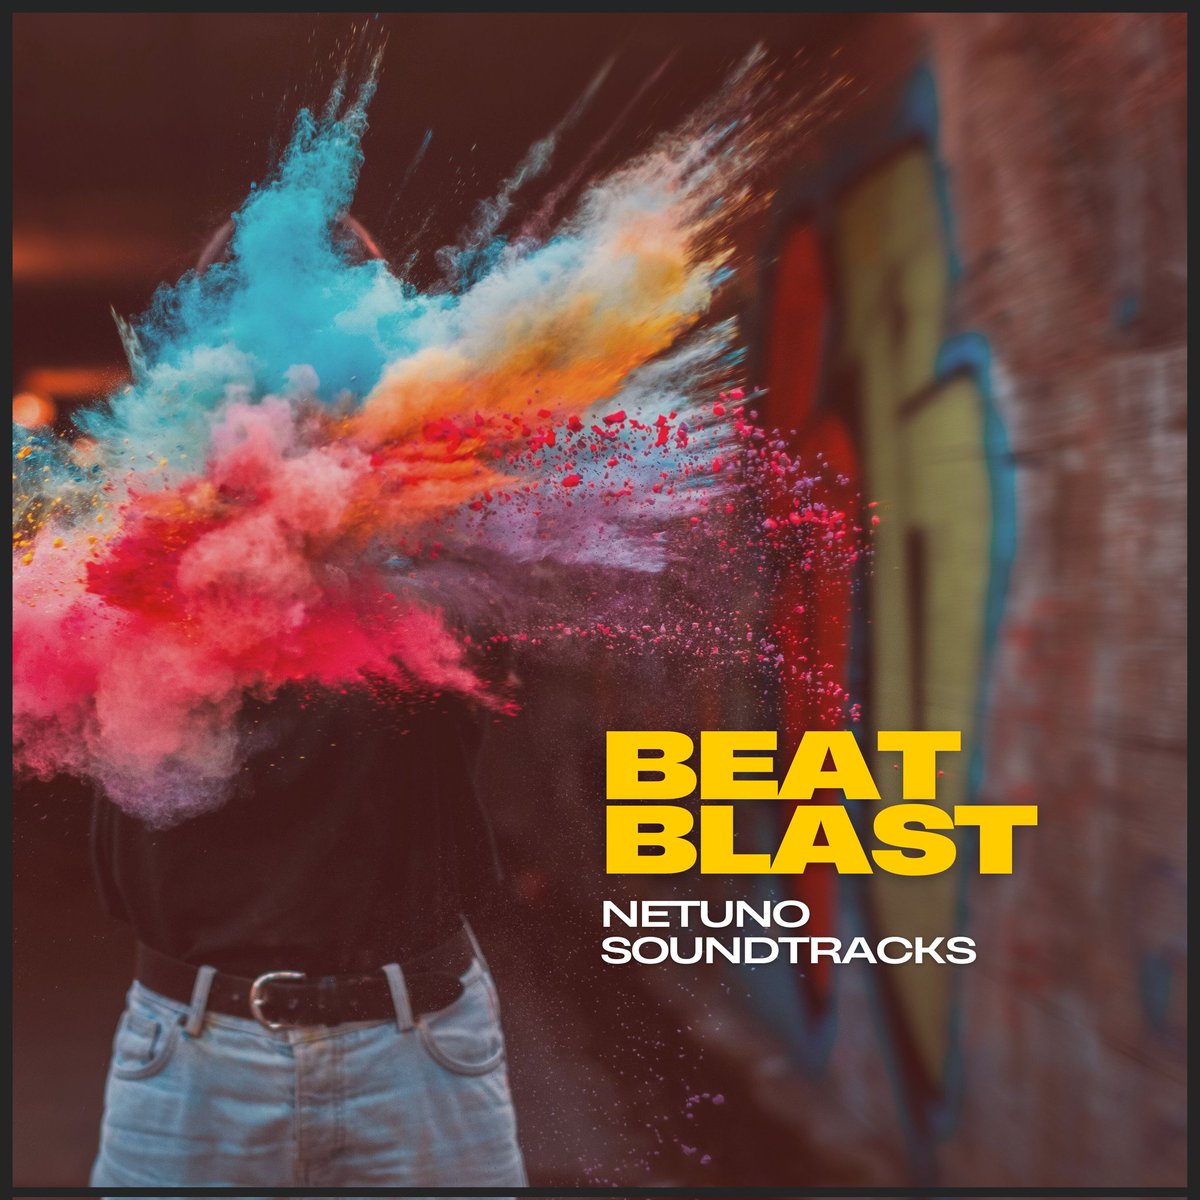 Introducing 'Beat Blast' - the ultimate high-energy soundtrack to elevate your videos! 💥 

Streaming/download/licensing:
bio.link/netuno

#BeatBlast #HighEnergyMusic #BackgroundMusic #DynamicSounds #VideoEditing #CreativeProjects #MusicForVideos #EnergeticBeats #Powerful